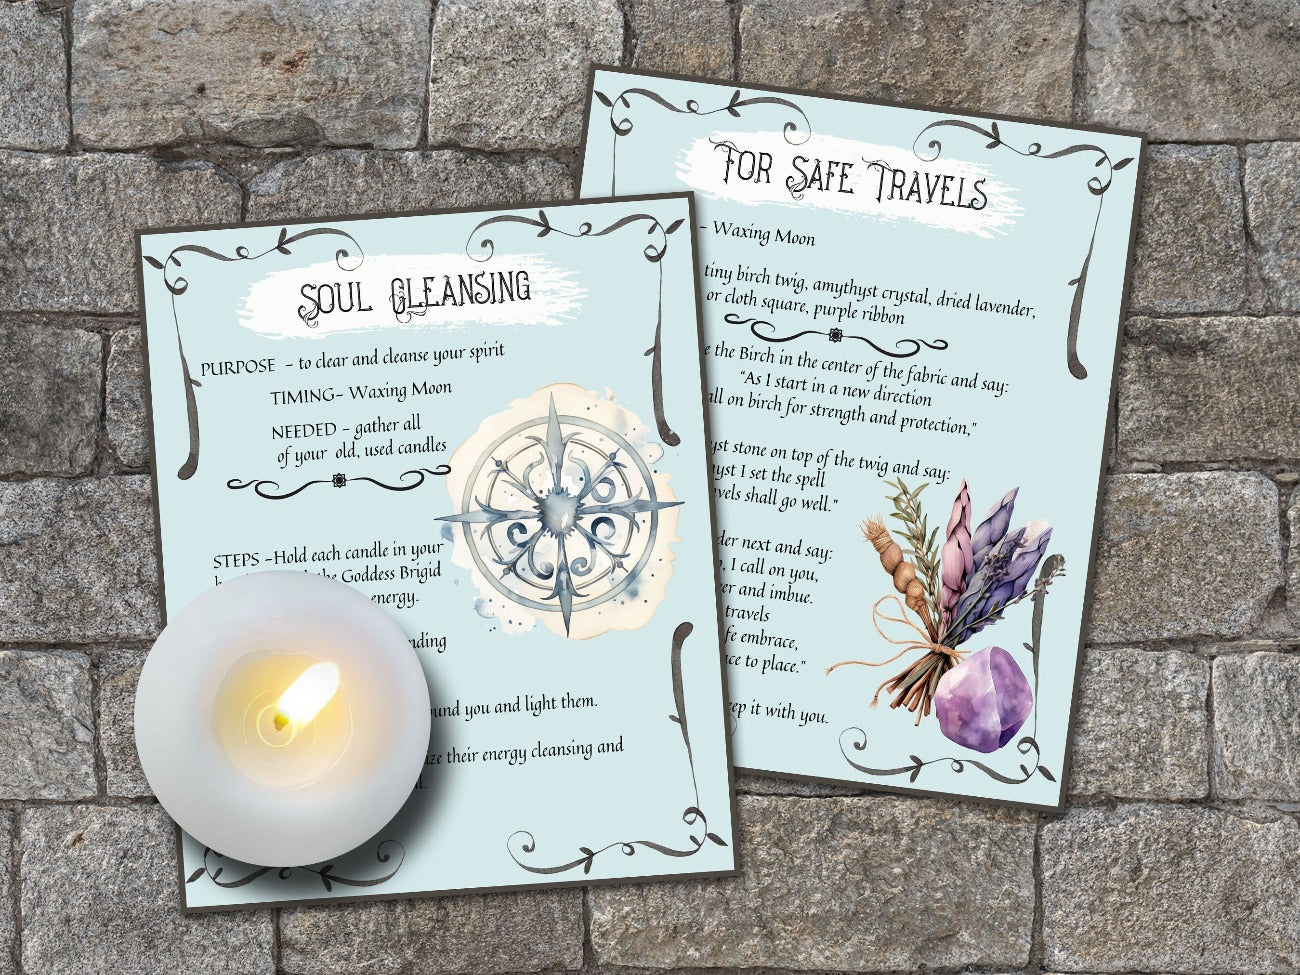 IMBOLC SPELL CARDS, Soul Cleansing and Safe Travel Cards - Morgana Magick Spell